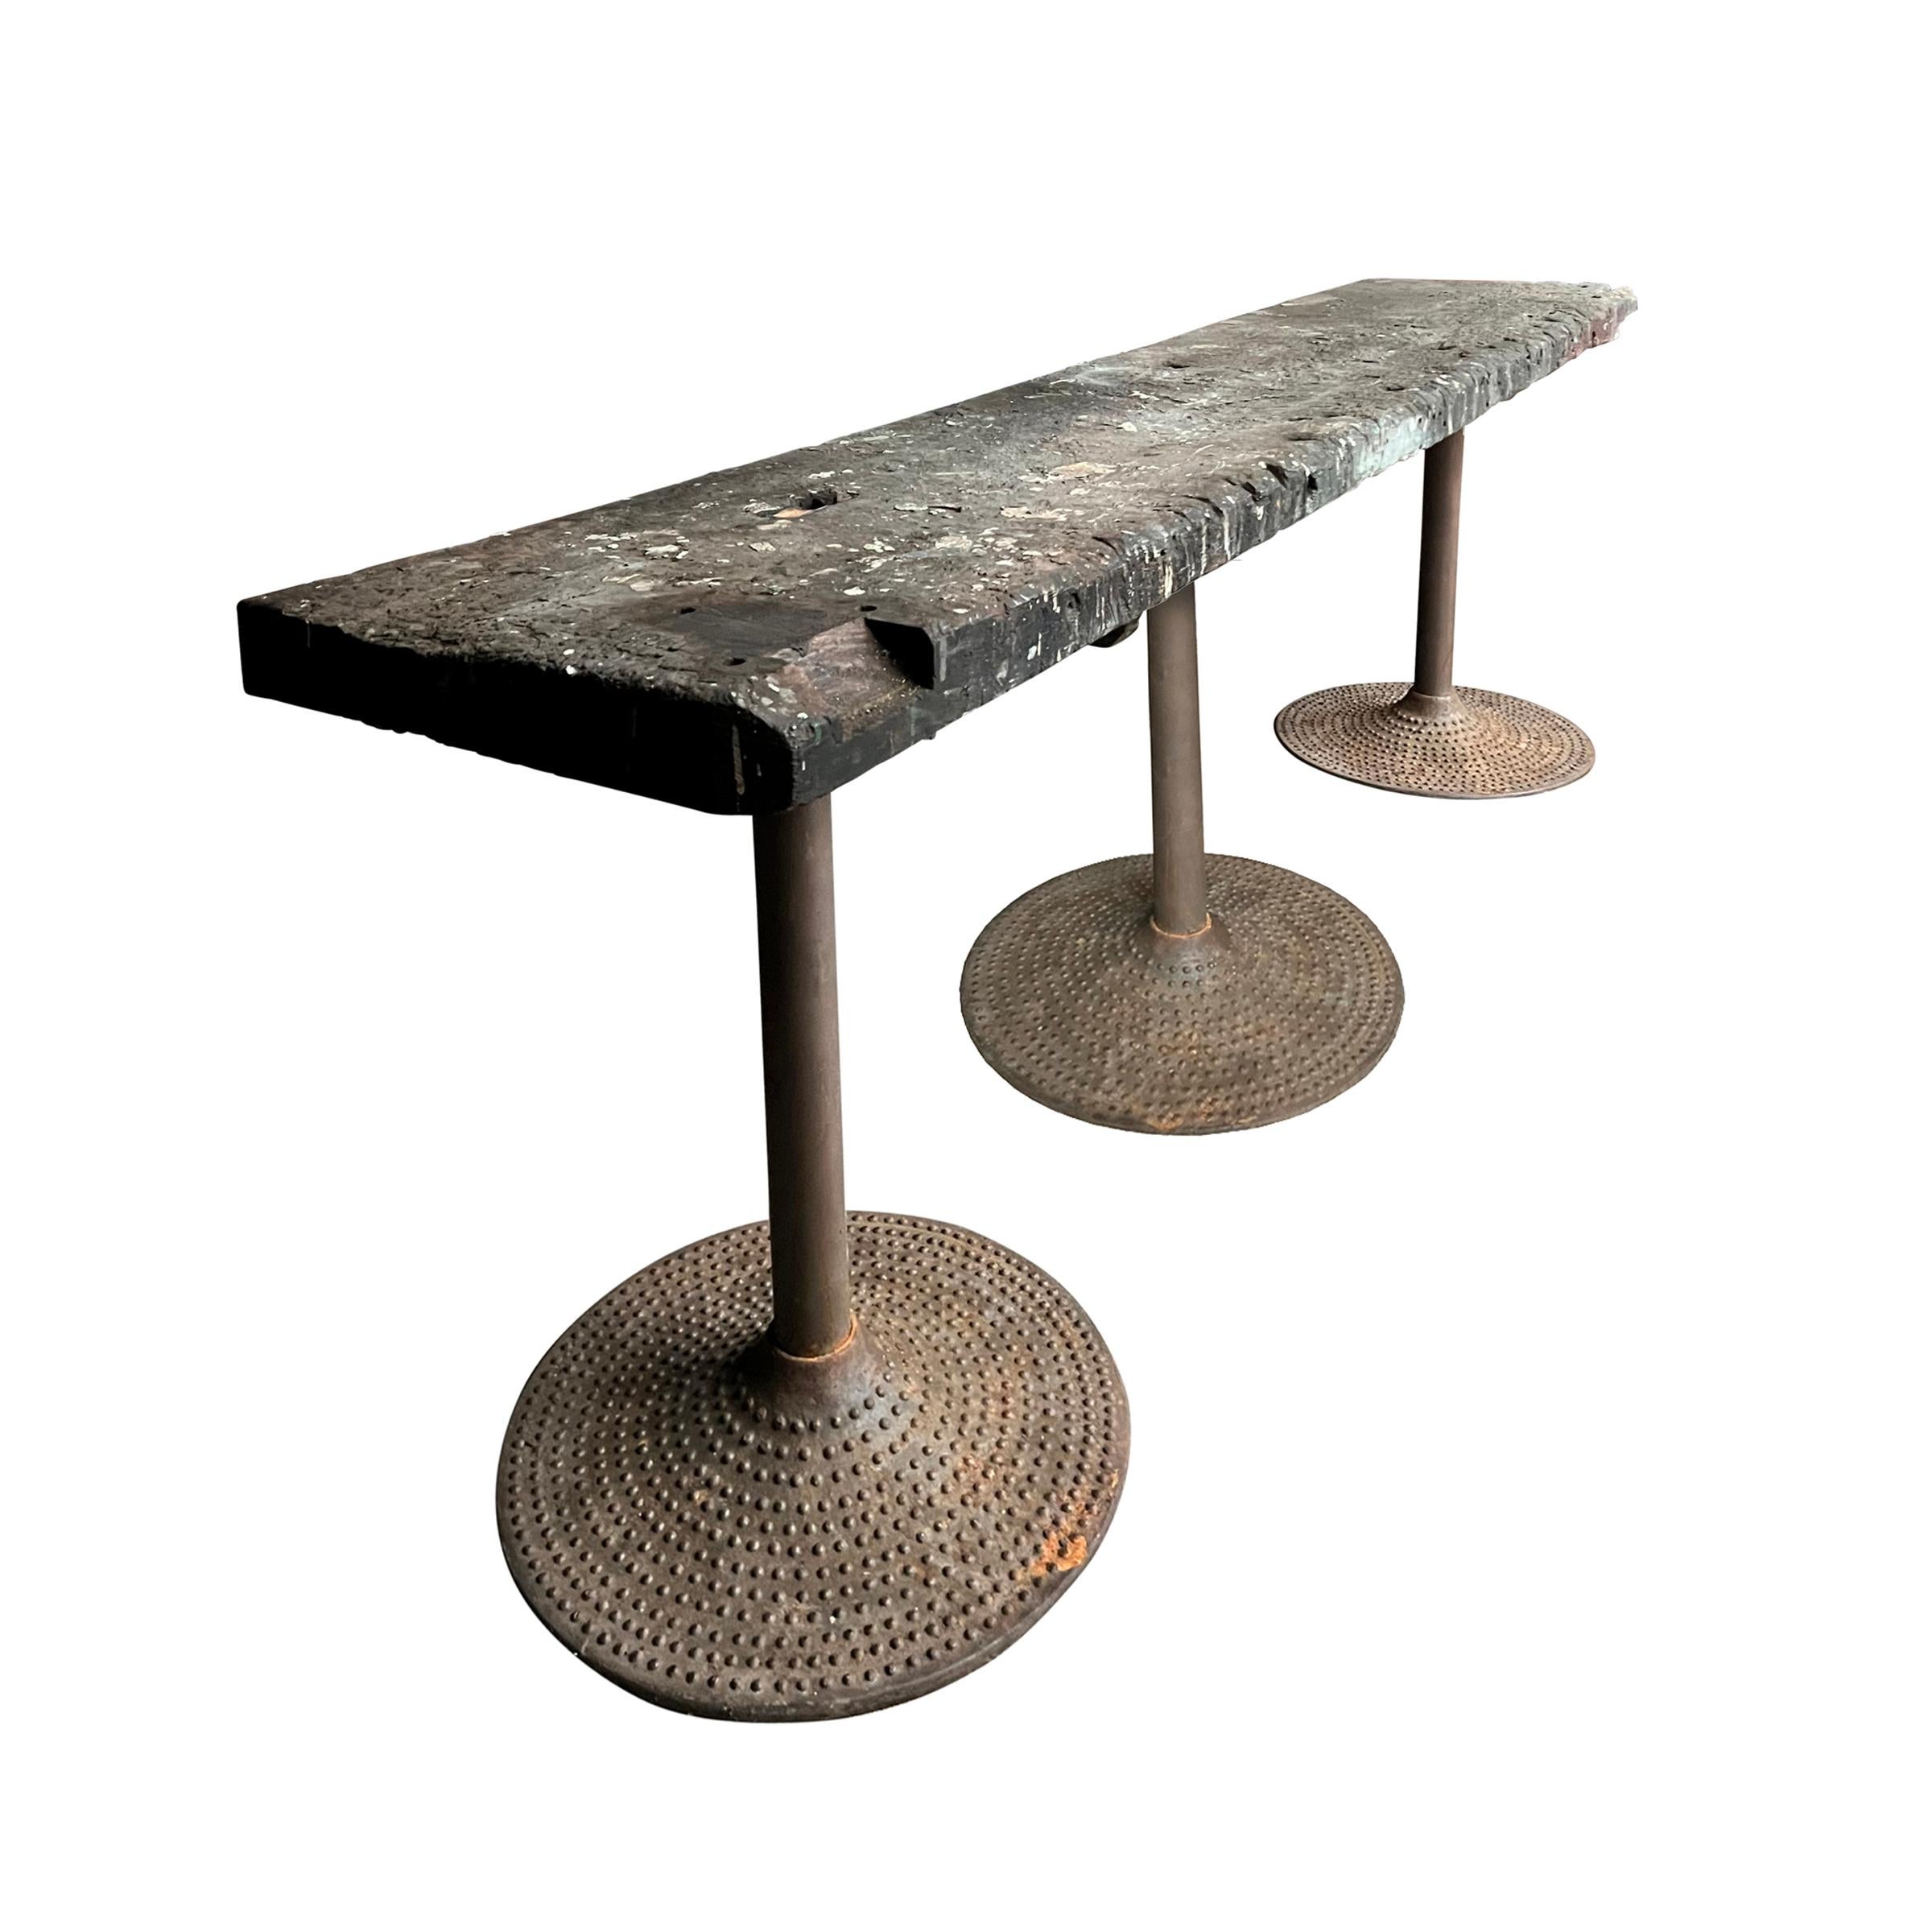 Iron Early 20th Century American Industrial Work Table